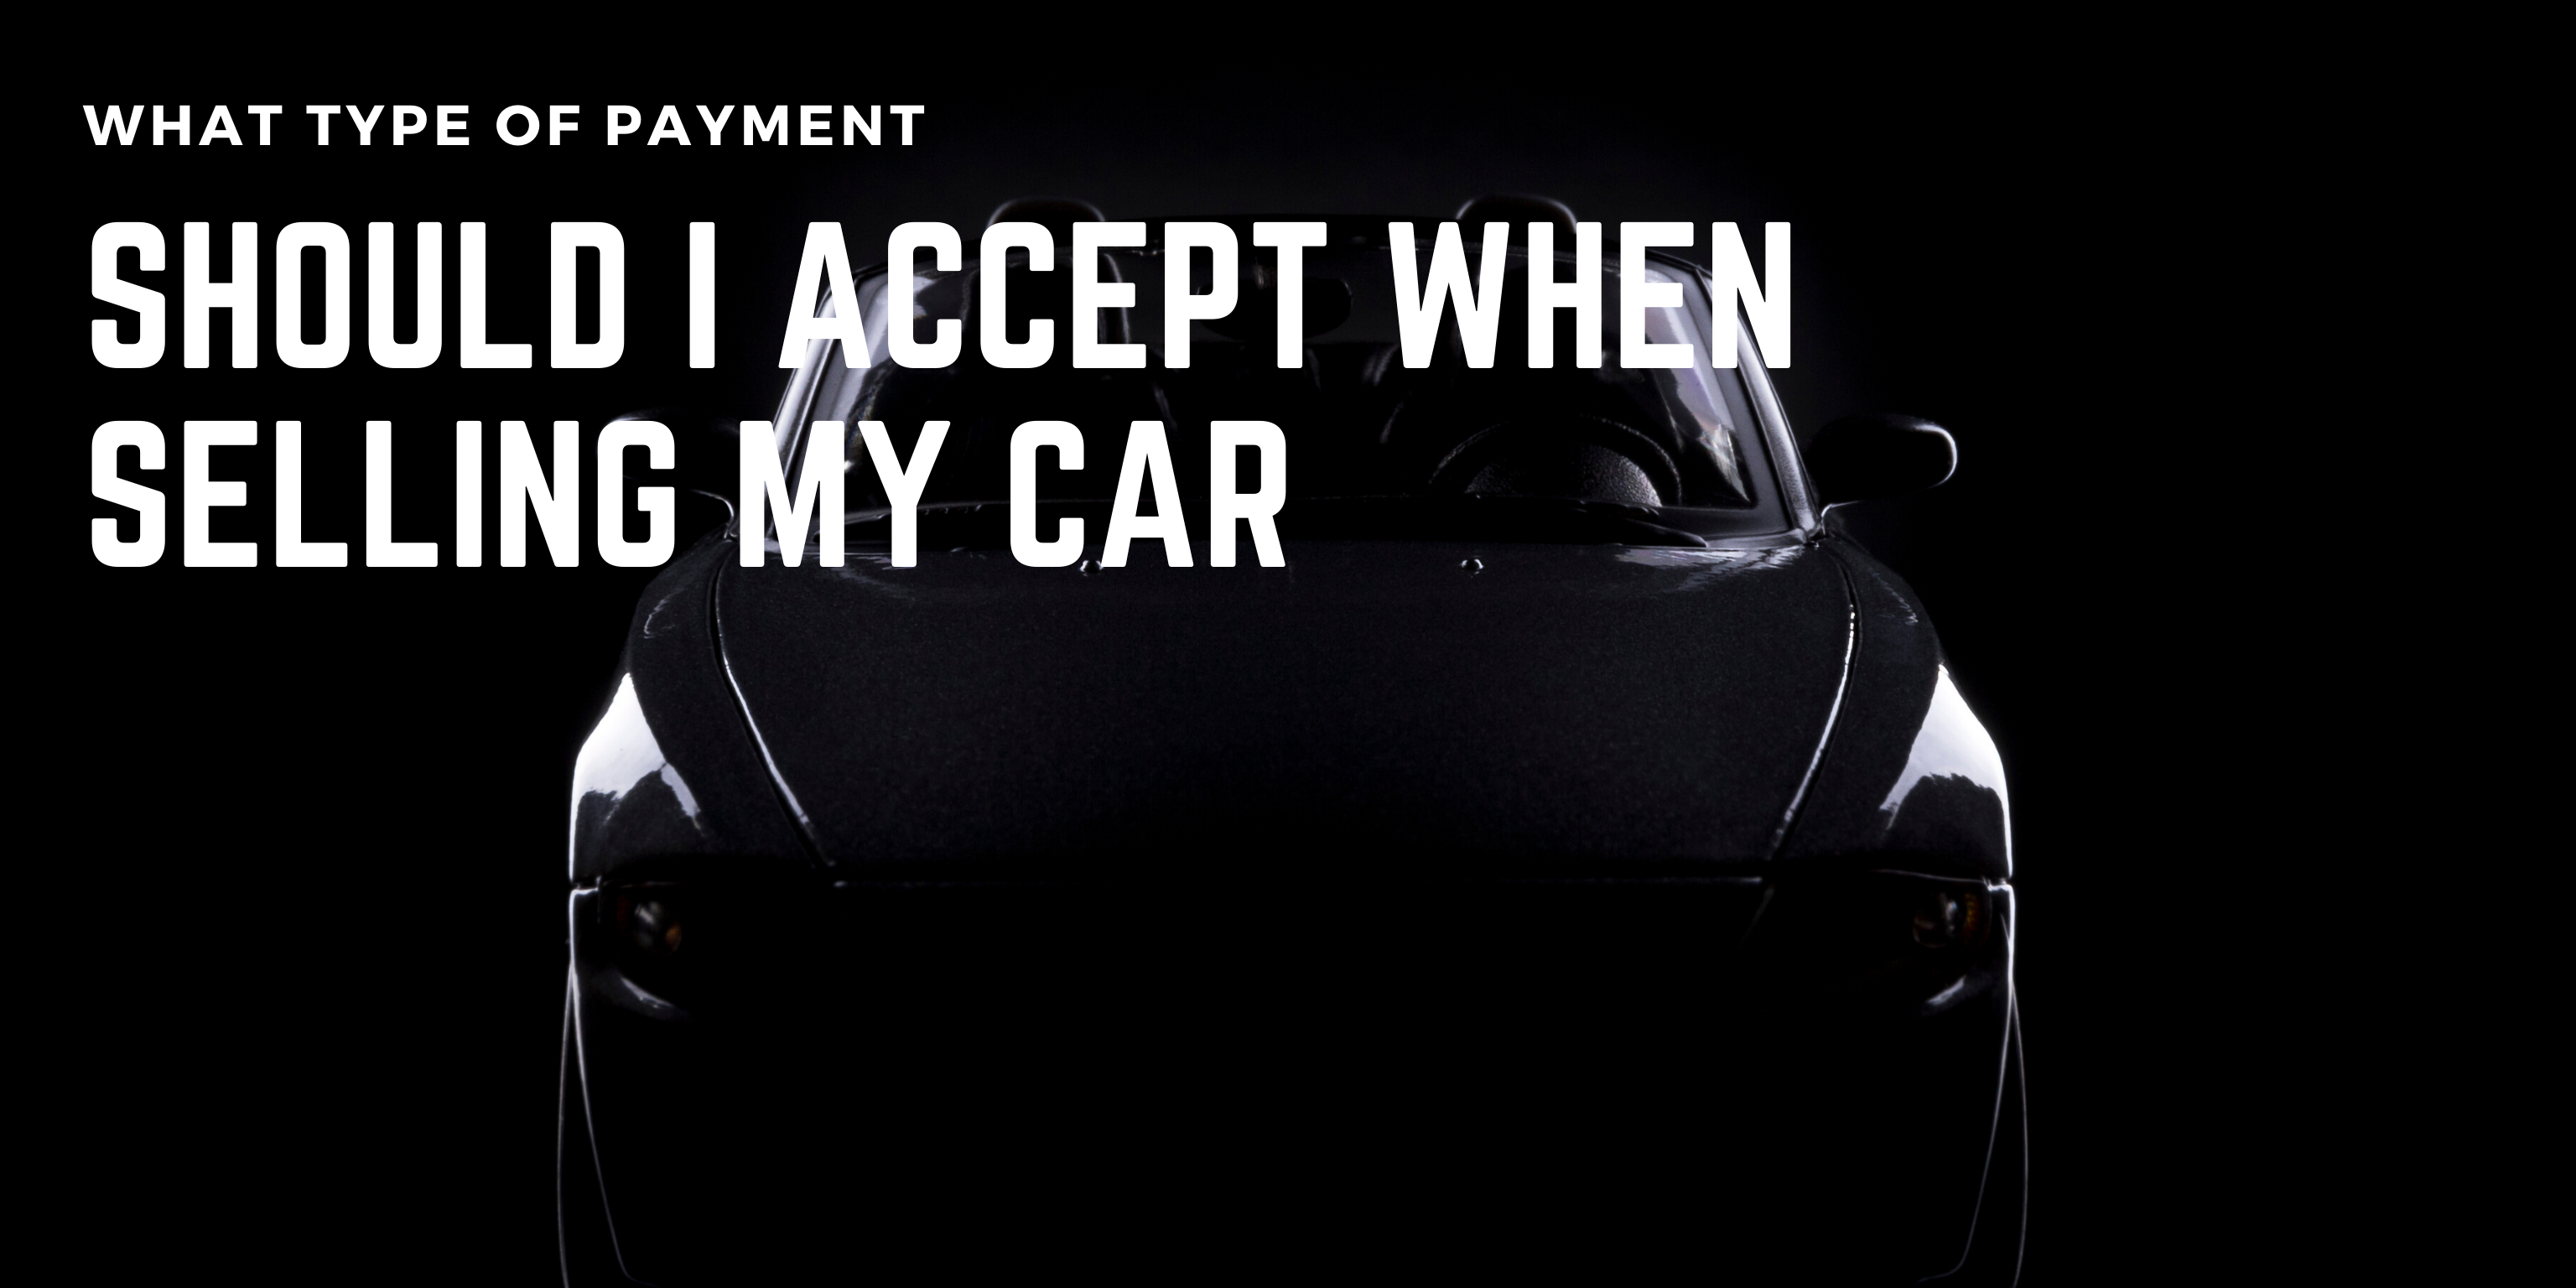 What Type of Payment Should I Accept When Selling My Car?